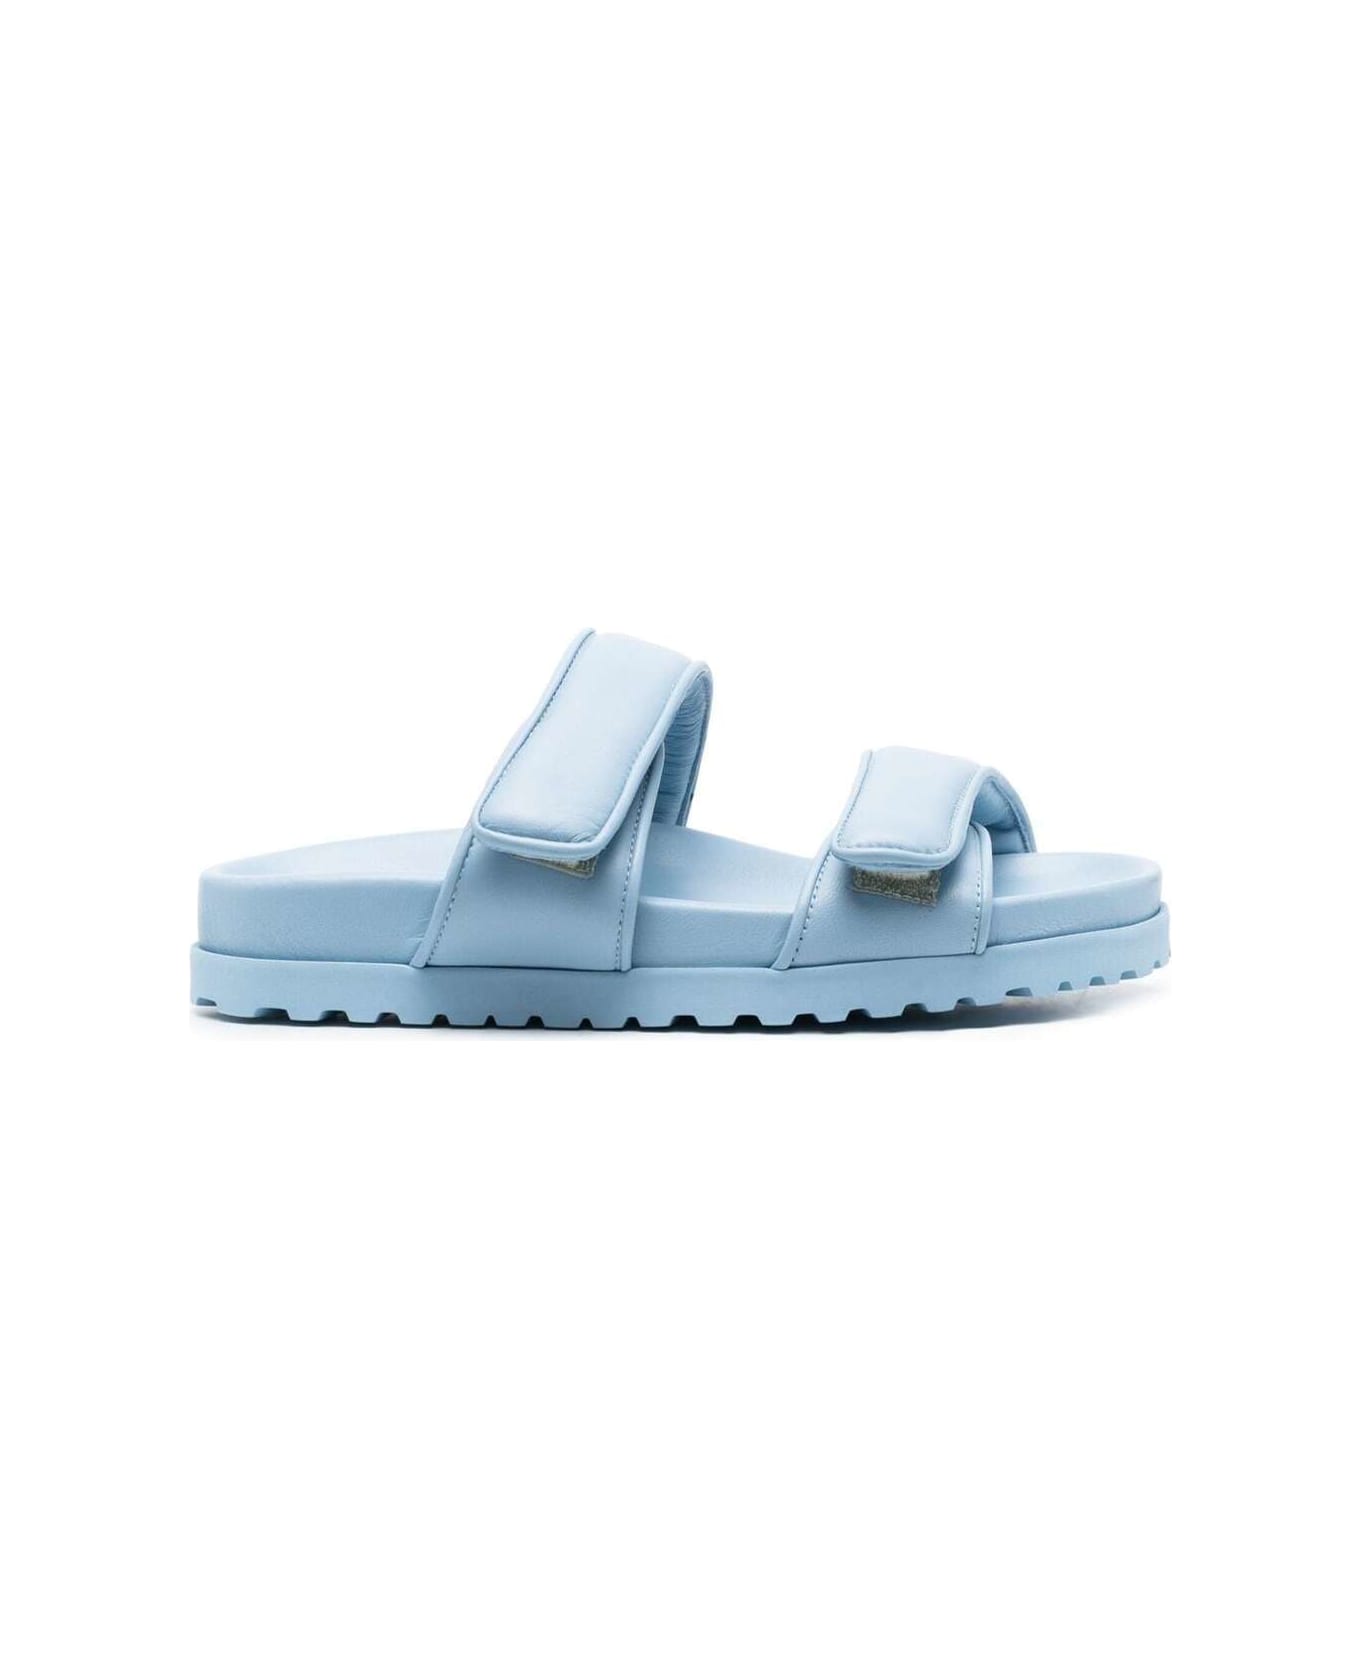 GIA BORGHINI Light-blue Strap Fastening Sandals In Leather Woman - Light blue サンダル